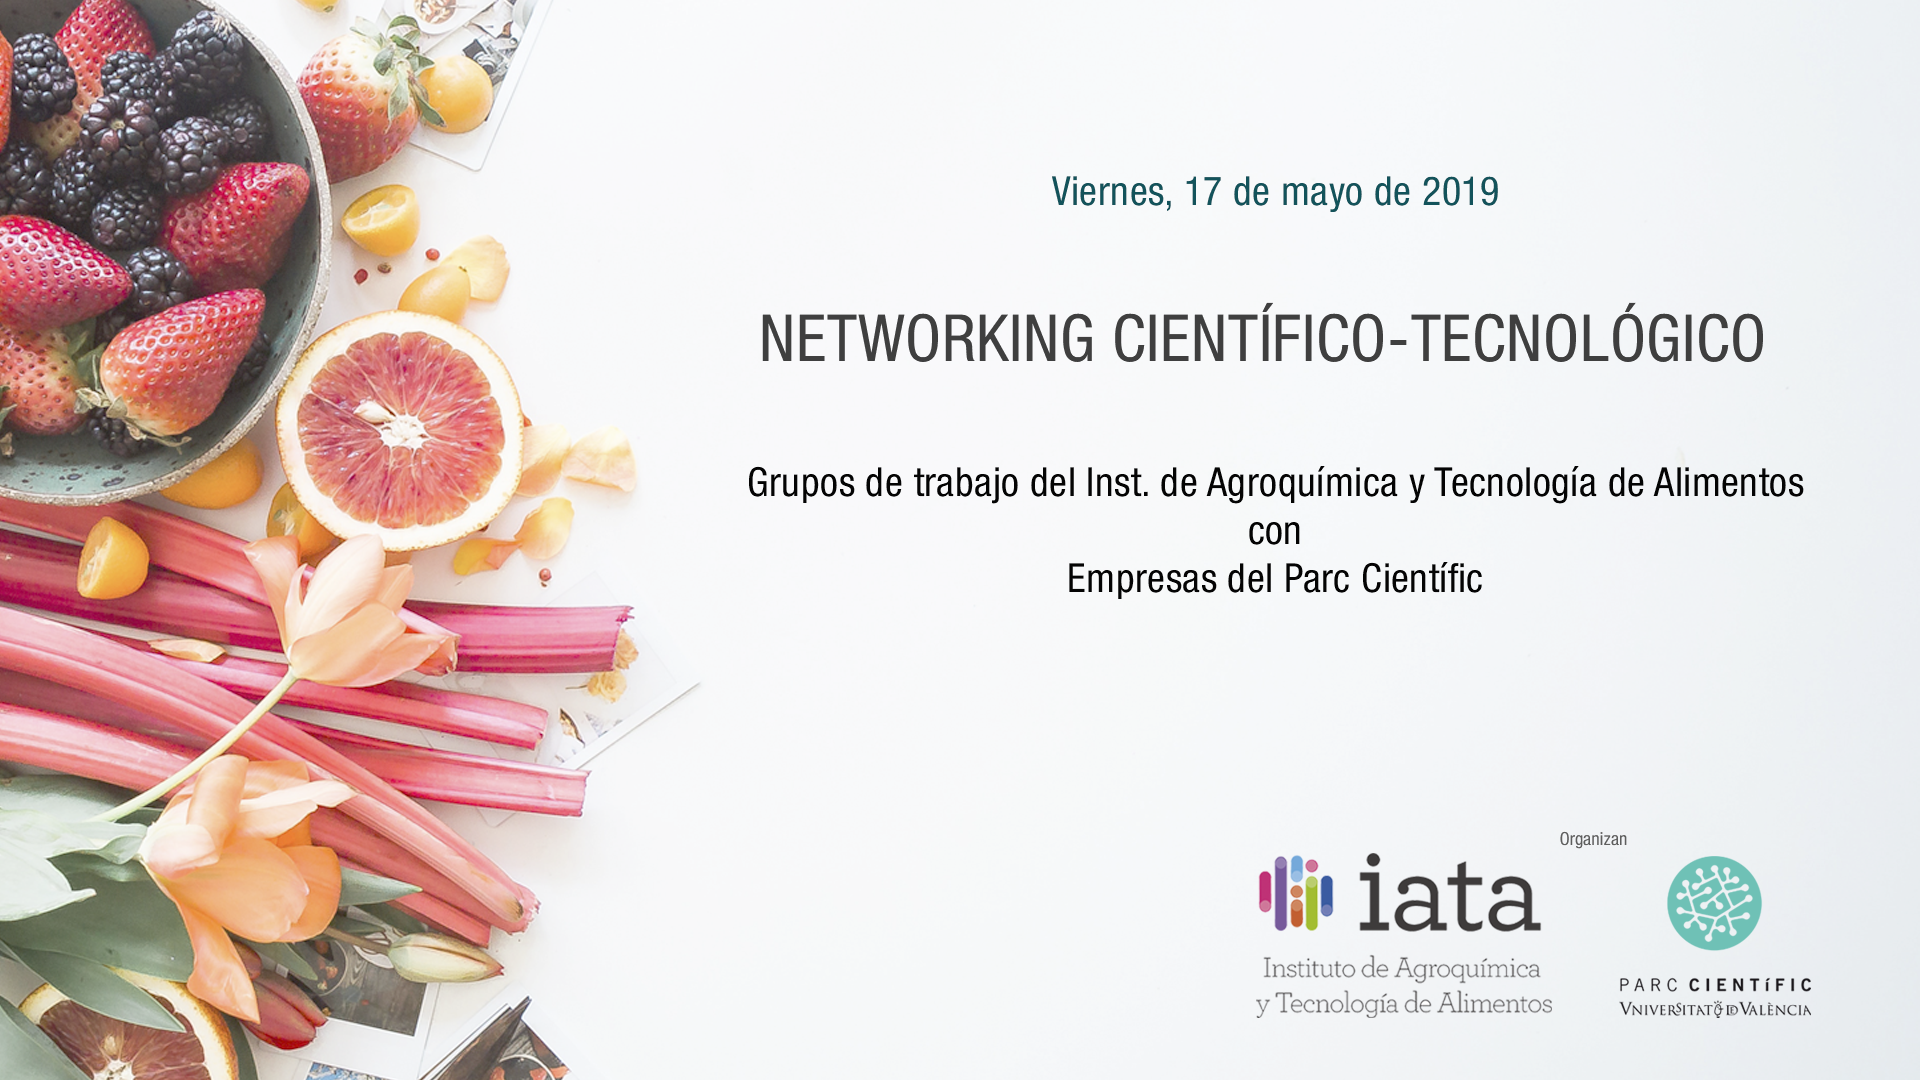 Networking between IATA and the companies of the Science Park